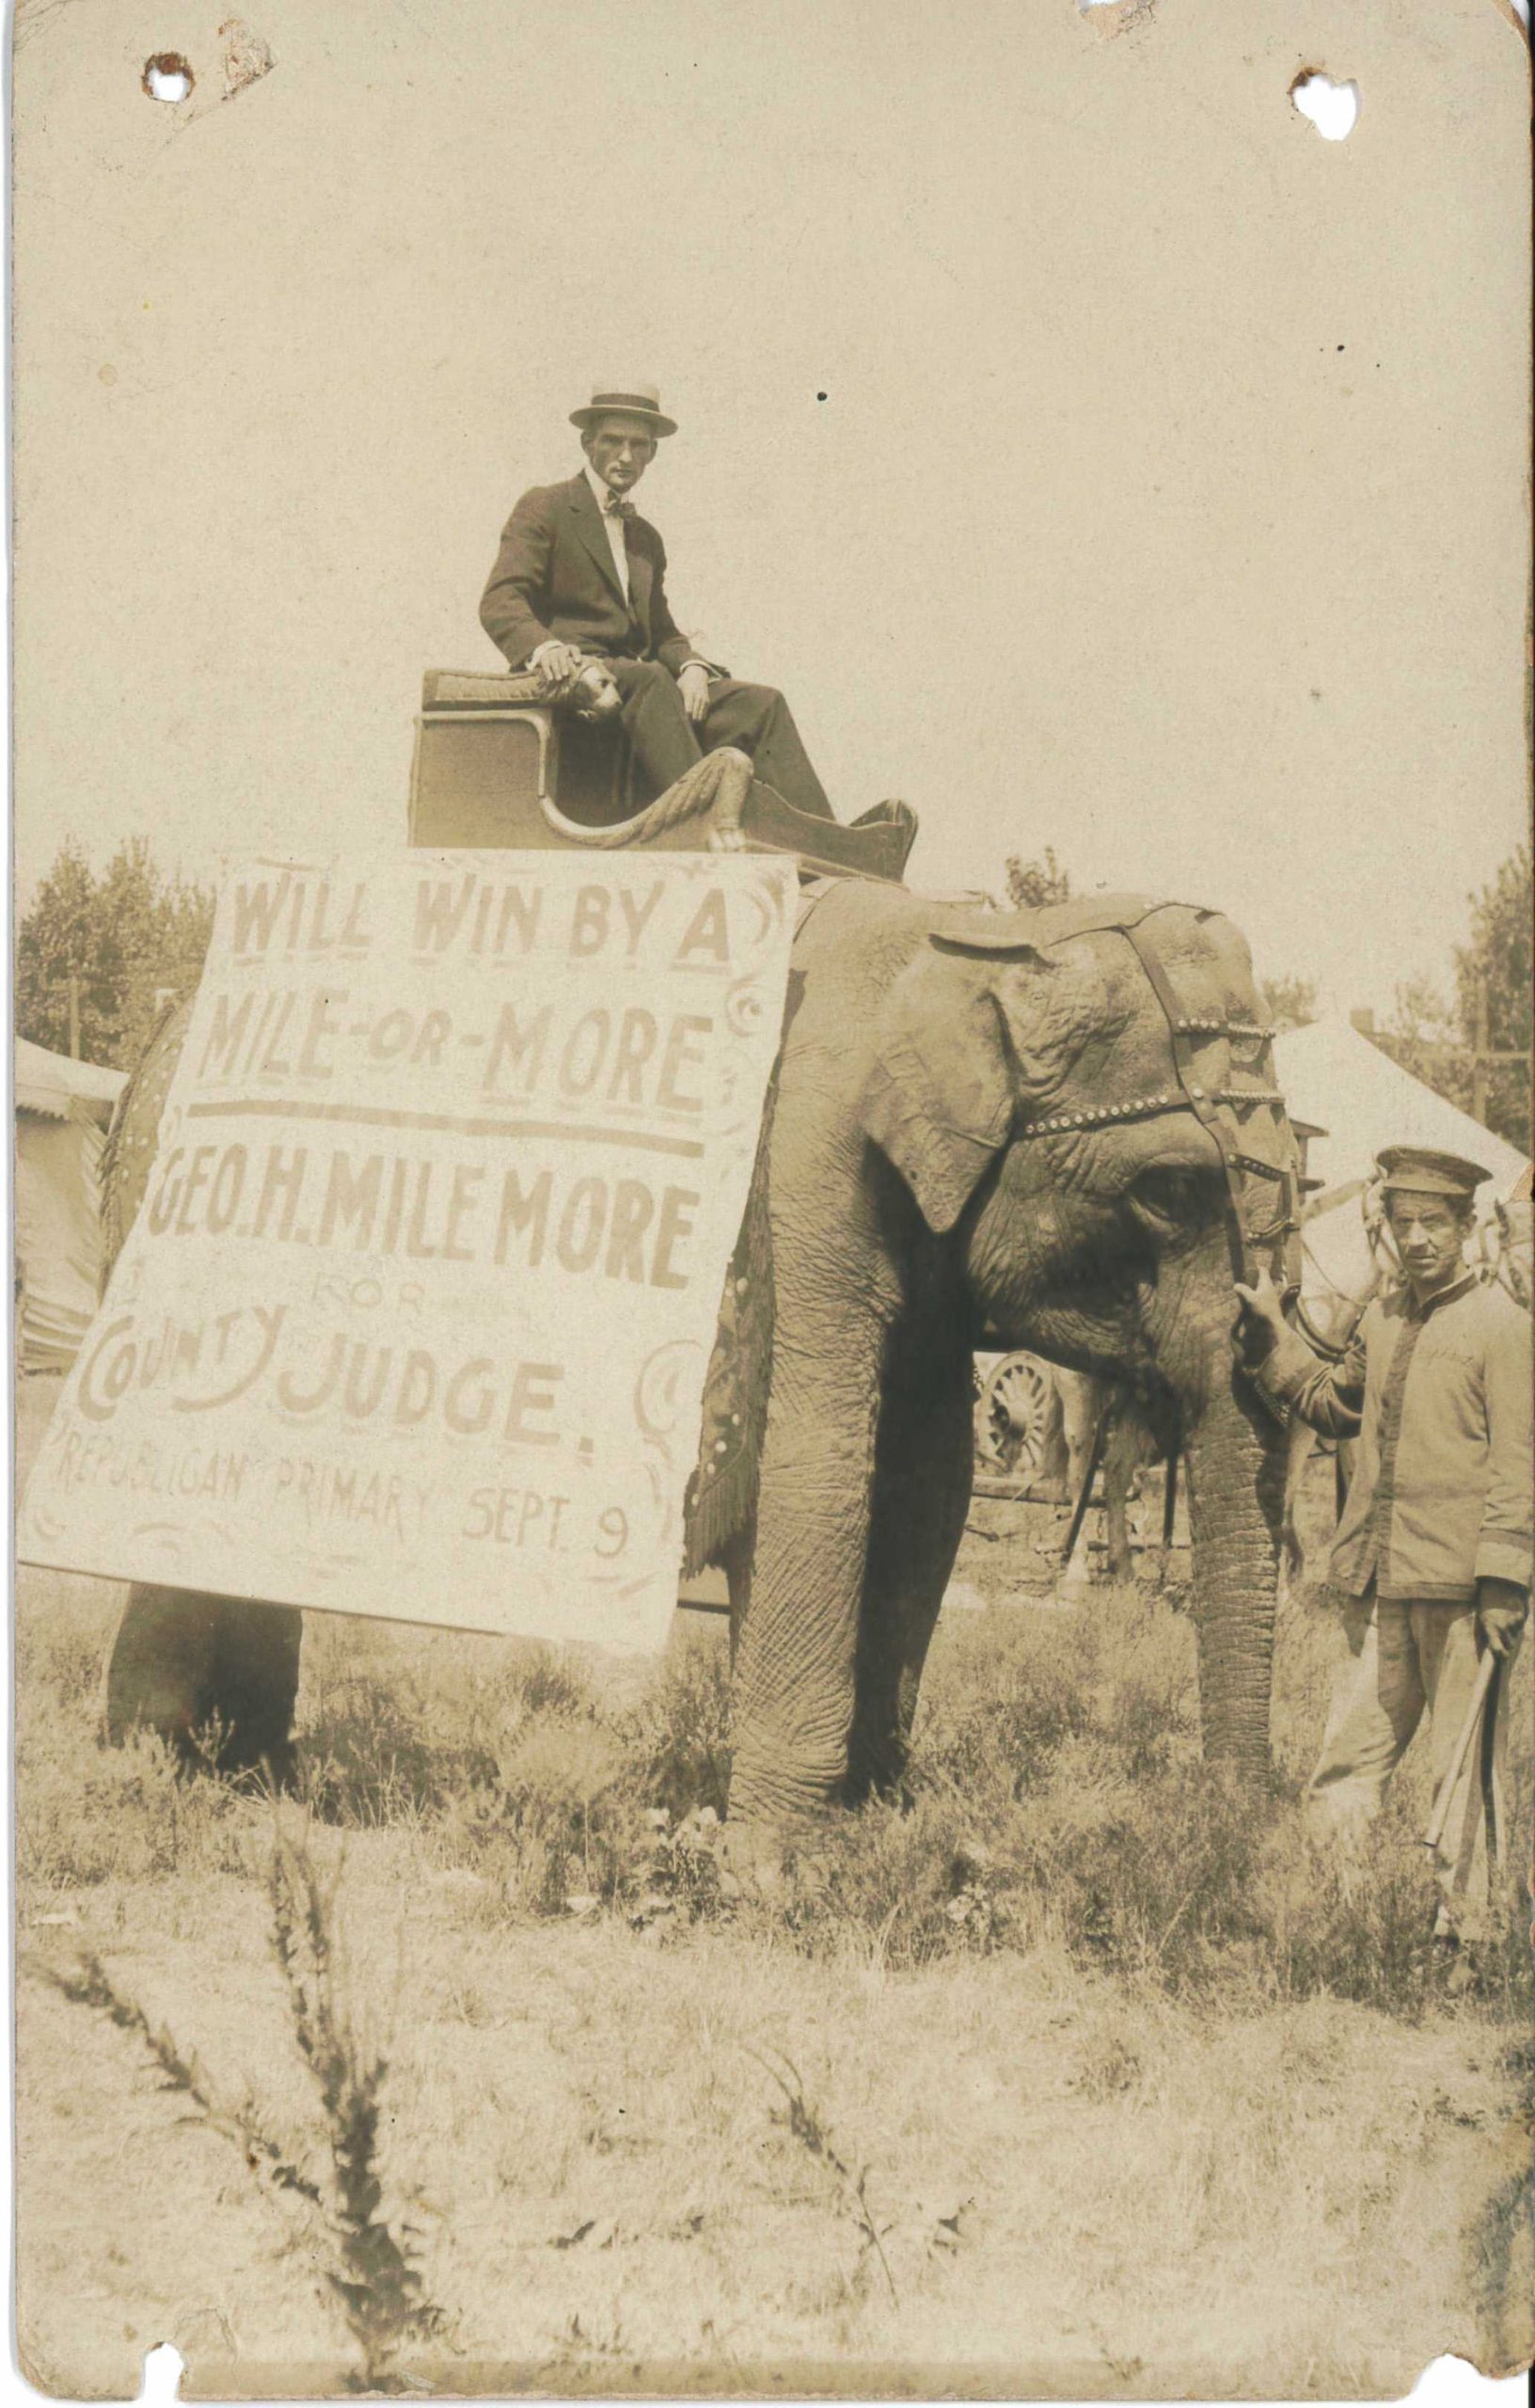 Sepia-toned photograph of an elephant in a grassy field wearing a sign reading "Will Win by a Mile or More. Geo. H. Milemore, County Judge." A man in a dark suit, bow tie, and hat rides the elephant.